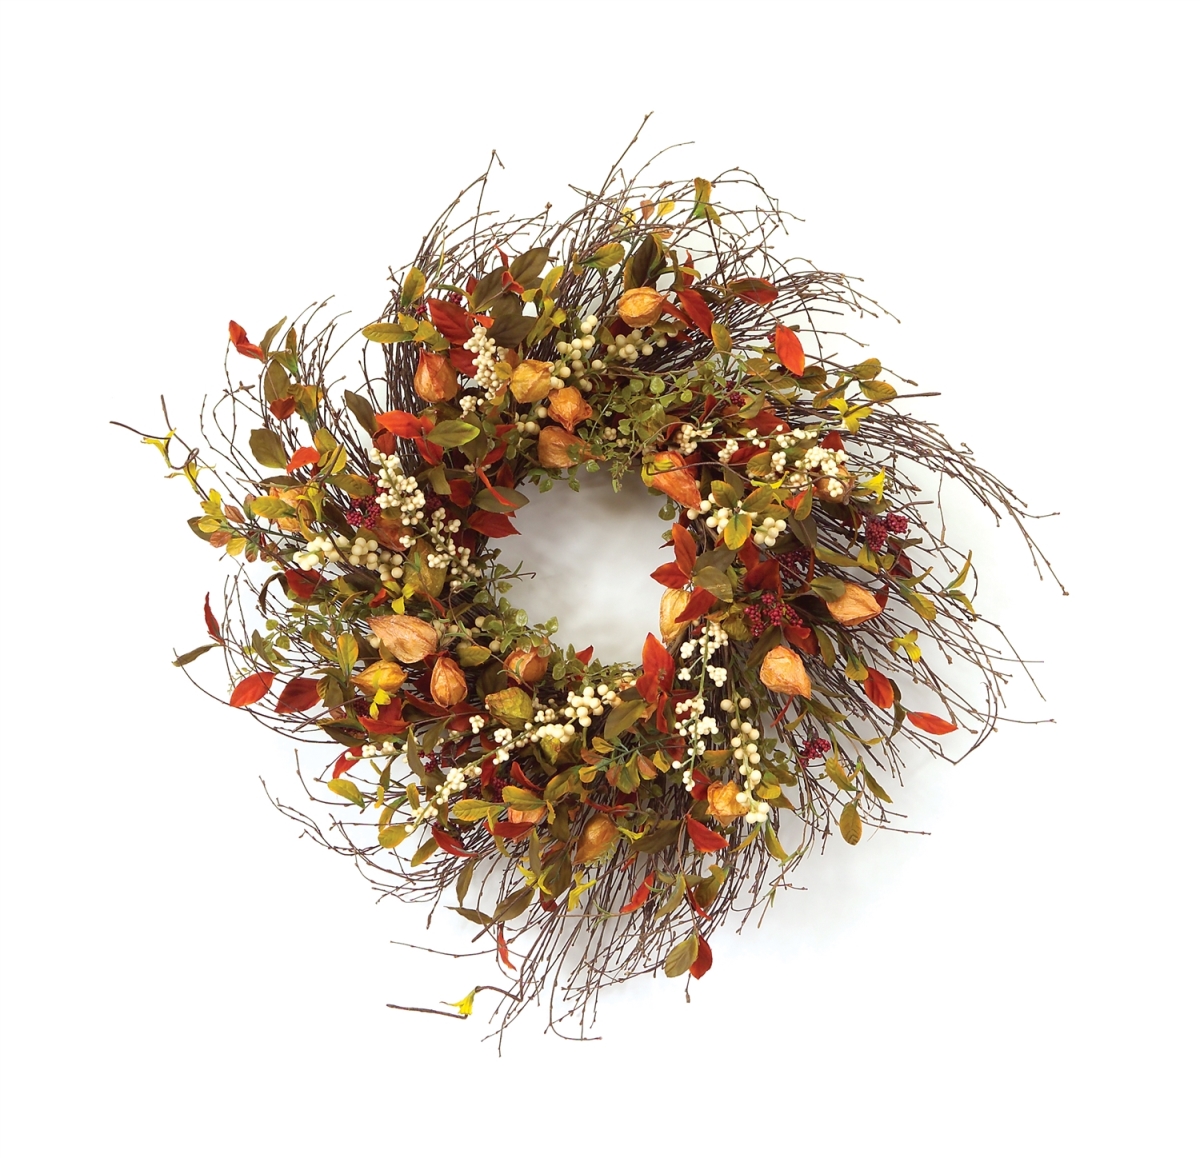 UPC 746427443432 product image for 44343 20 in. Twig & Fabric Cape Gooseberry Wreath | upcitemdb.com